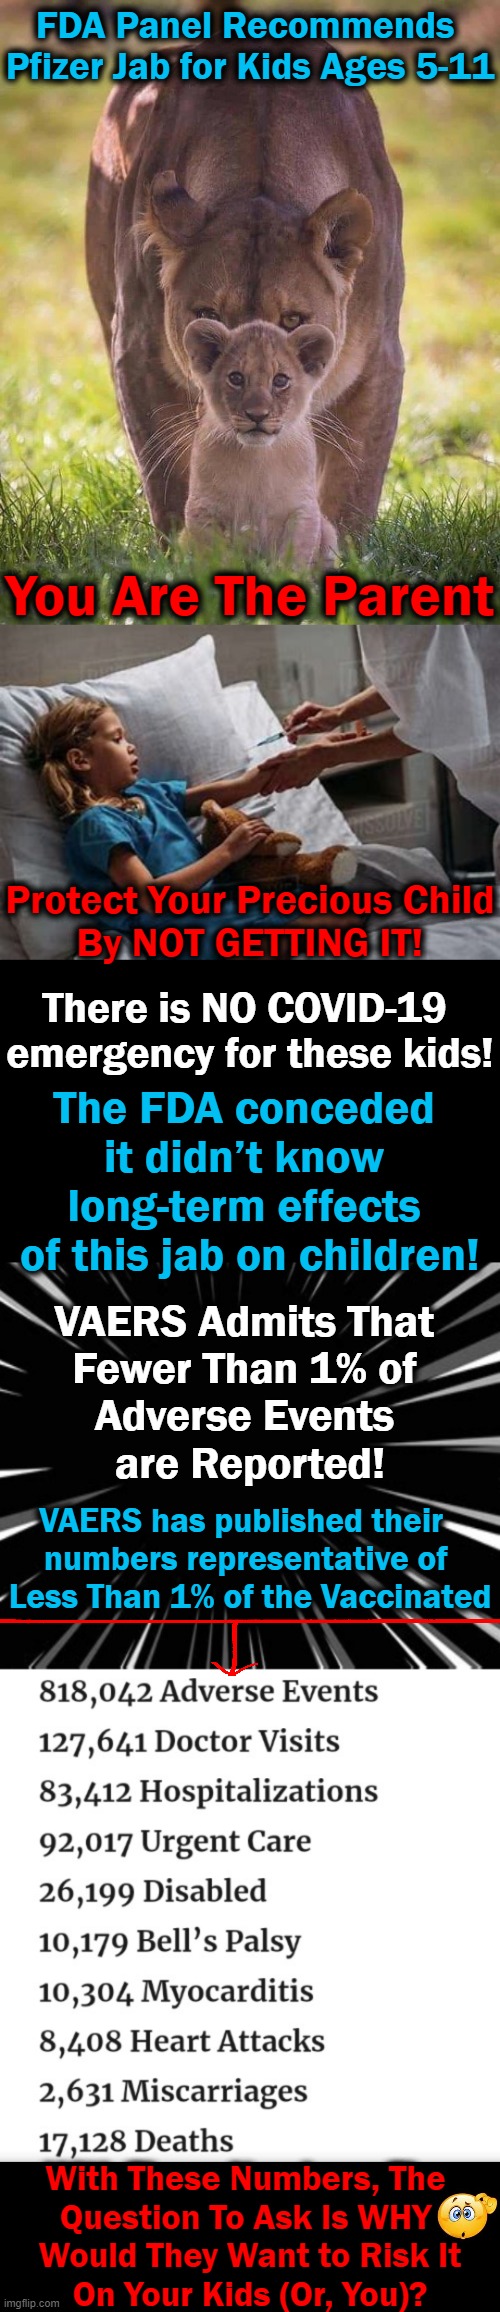 An mRNA Experimental Jab Against a Virus That Kids Have > a 99.997% chance of survival? It Makes NO Sense.... | FDA Panel Recommends 
Pfizer Jab for Kids Ages 5-11; You Are The Parent; Protect Your Precious Child
By NOT GETTING IT! There is NO COVID-19 
emergency for these kids! The FDA conceded 
it didn’t know 
long-term effects 
of this jab on children! VAERS Admits That 
Fewer Than 1% of 
Adverse Events 
are Reported! VAERS has published their  
numbers representative of 
Less Than 1% of the Vaccinated; With These Numbers, The 
Question To Ask Is WHY 
Would They Want to Risk It
On Your Kids (Or, You)? | image tagged in politics,covid vaccine,experiment,fda,vaers,side effects | made w/ Imgflip meme maker